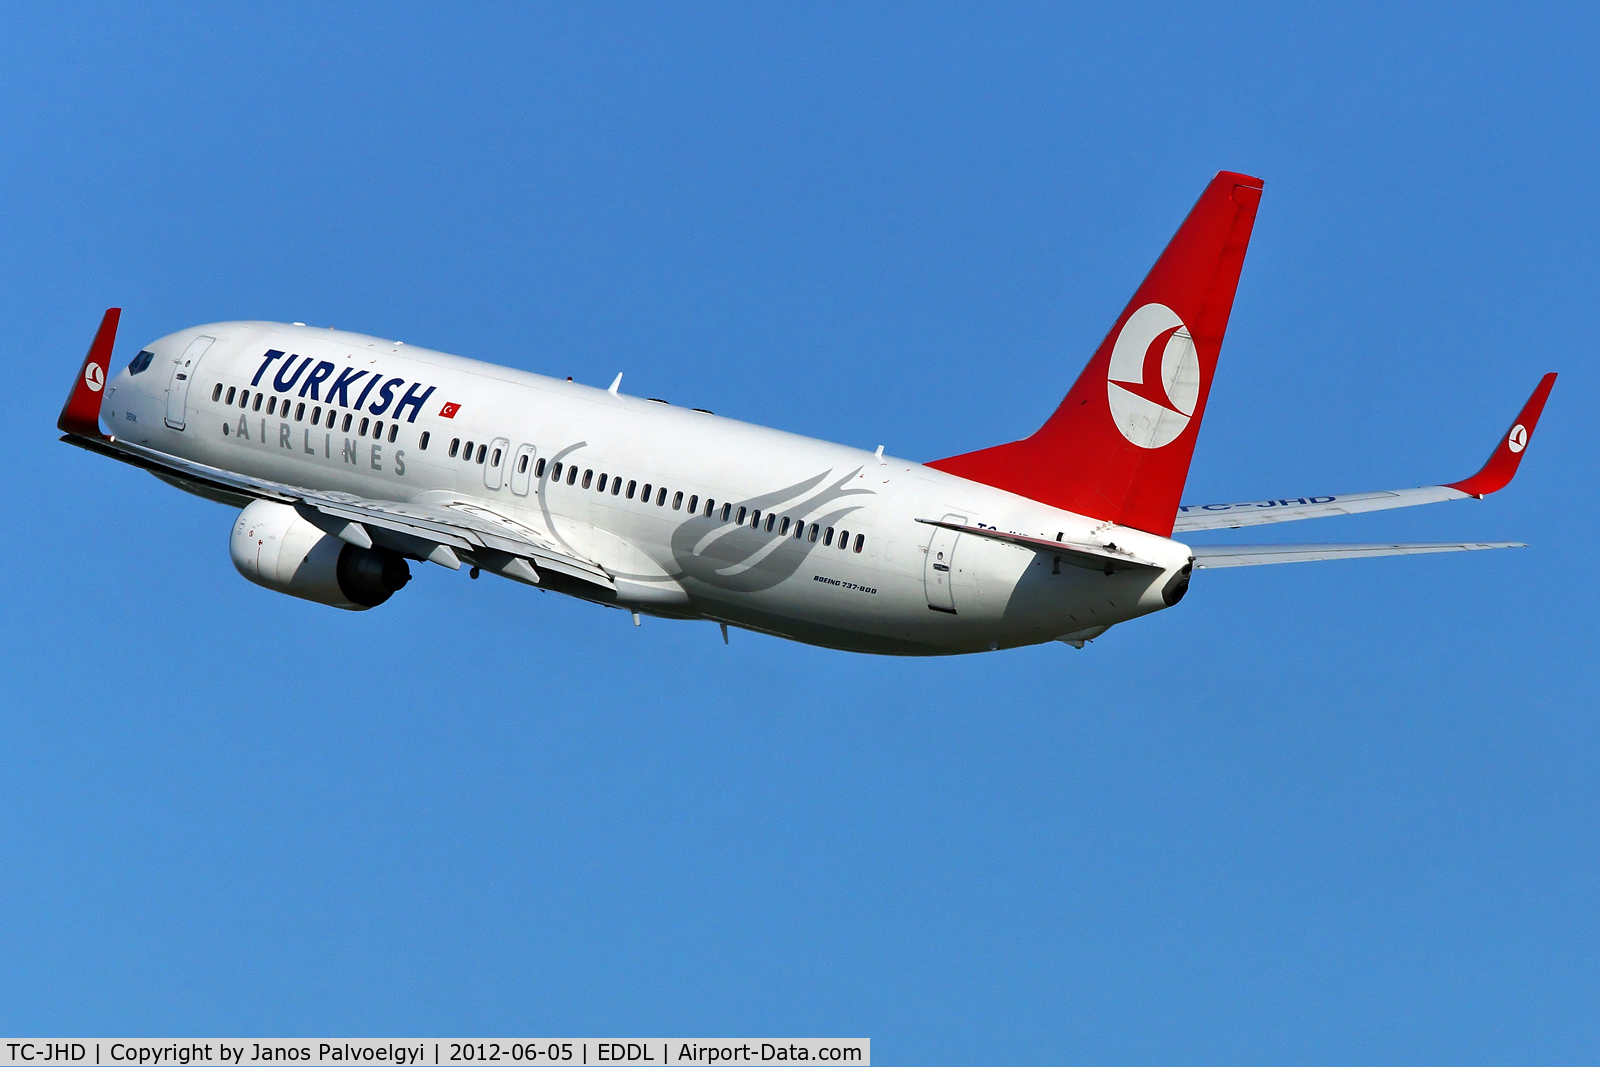 TC-JHD, 2008 Boeing 737-8F2 C/N 35743, Turkish Airlines Boeing B737-8F2 take off in EDDL/DUS